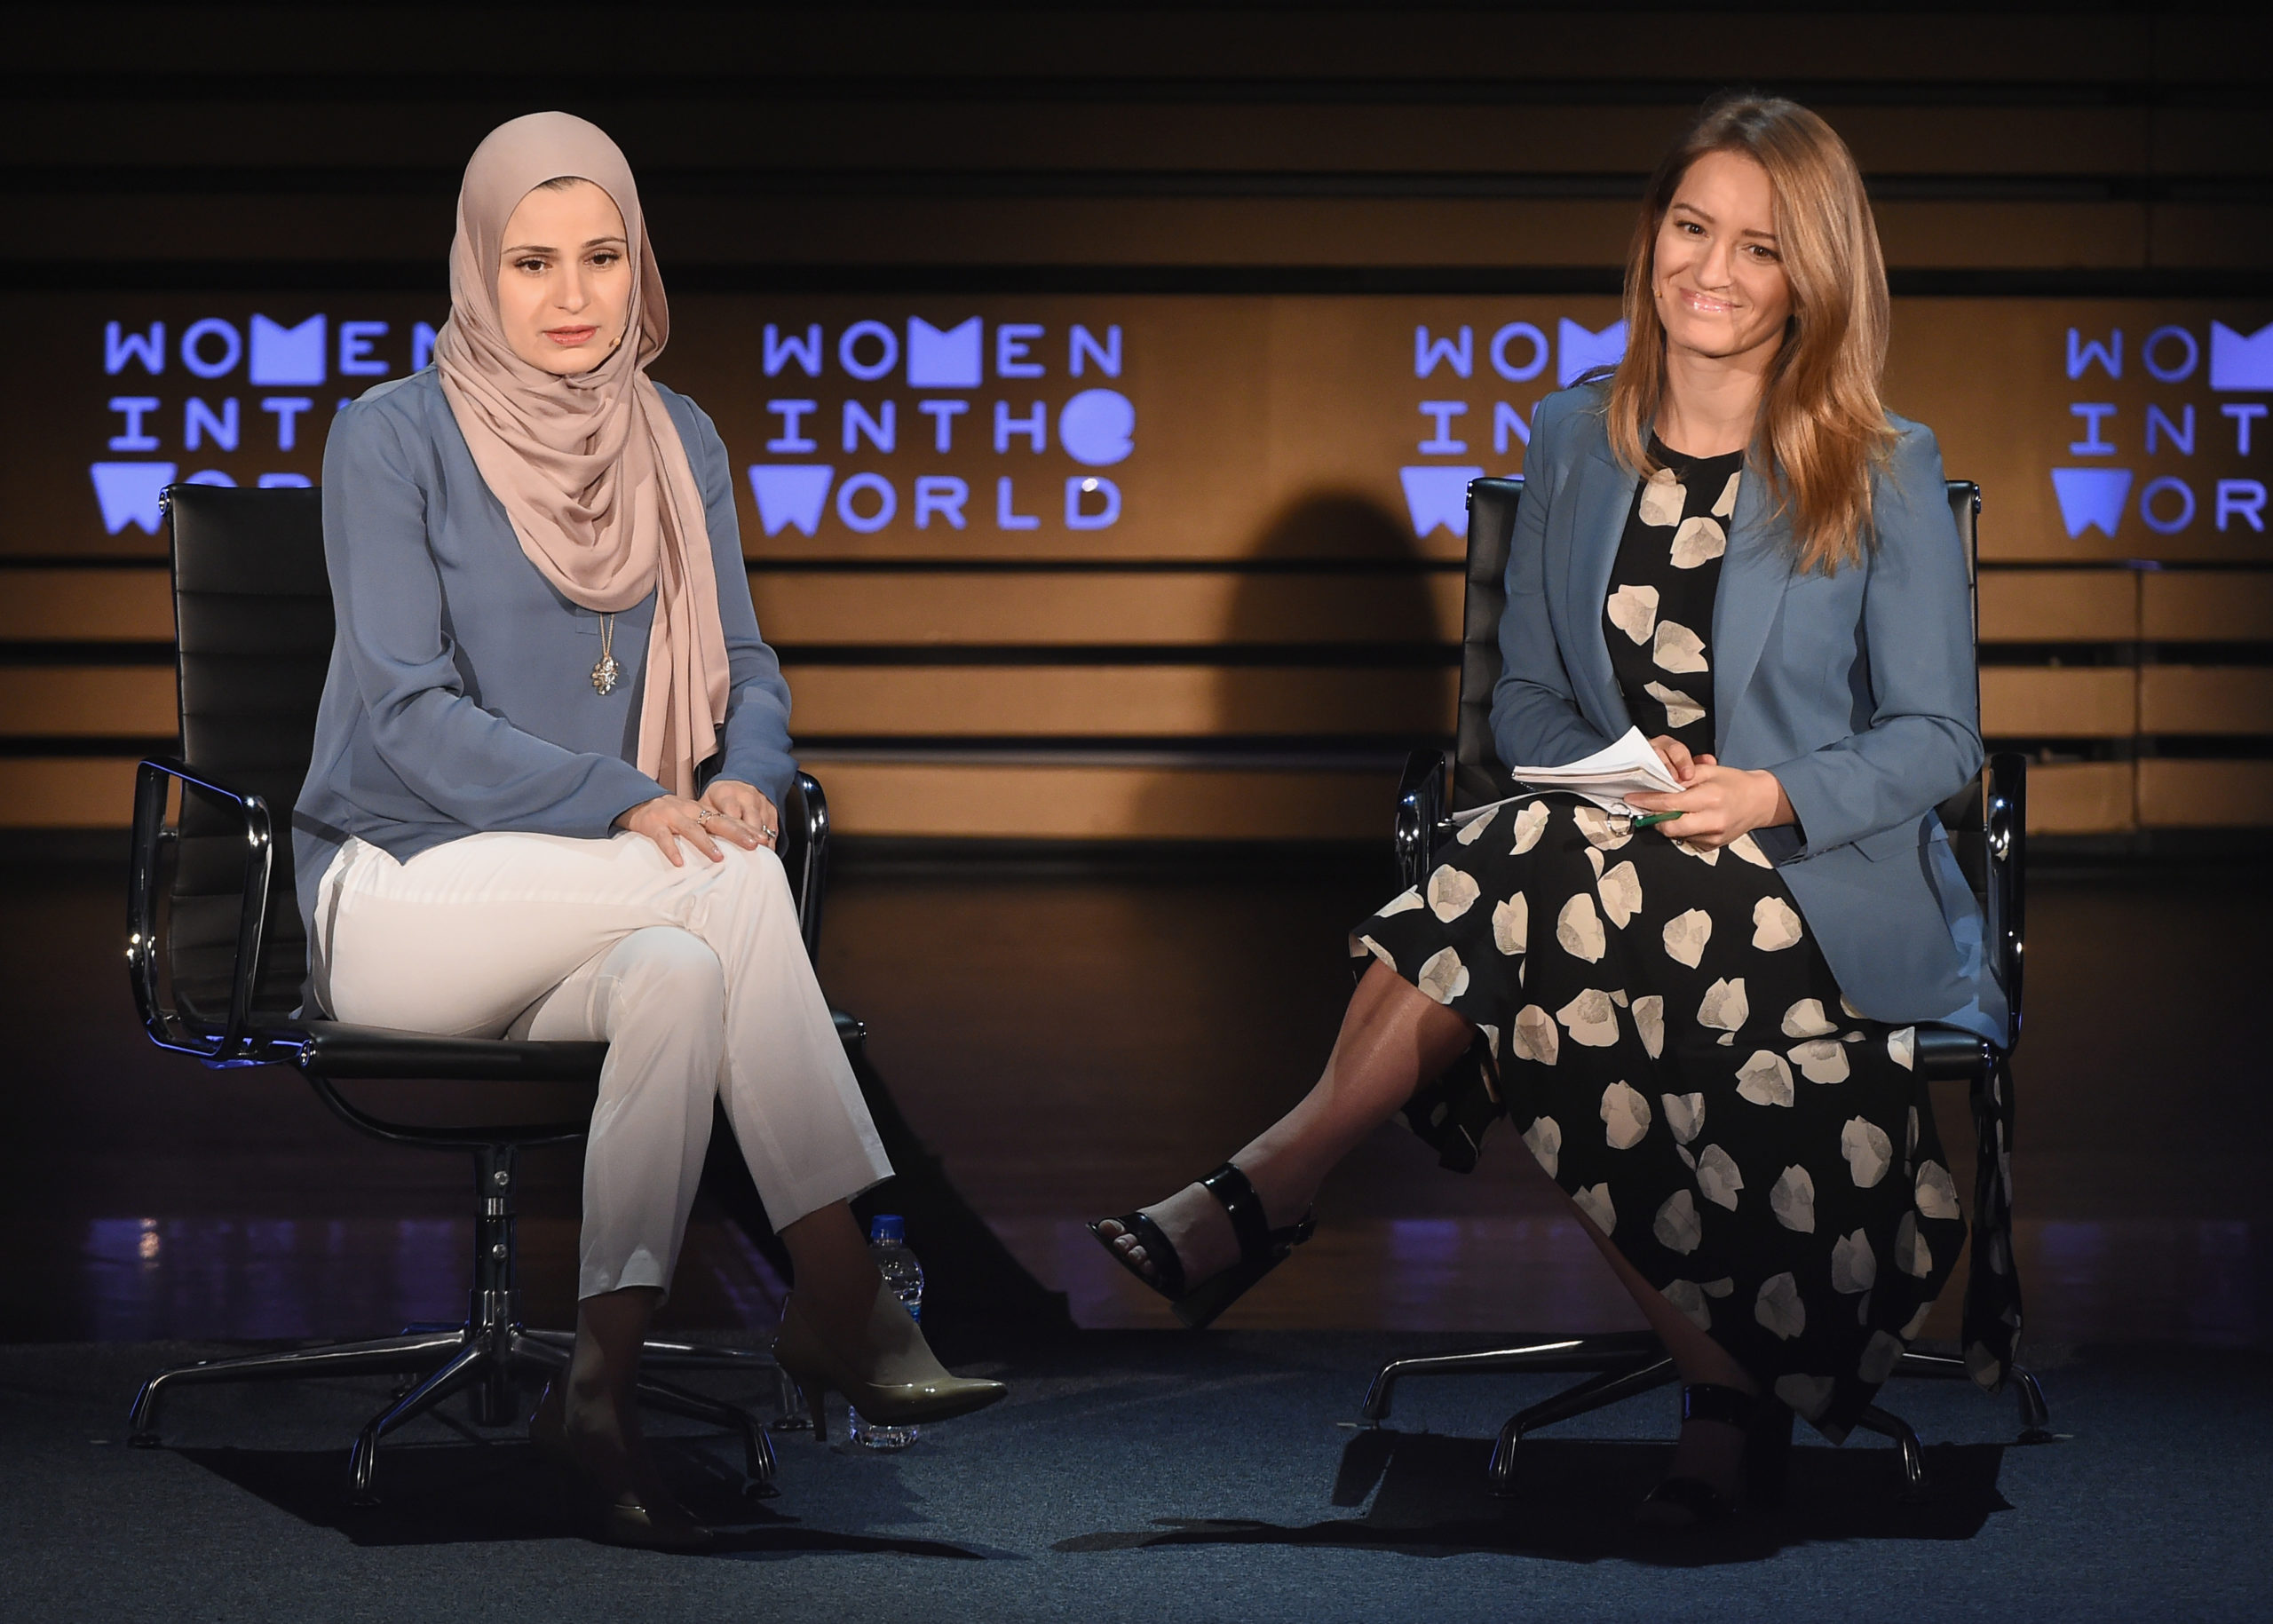 Dr. Suzanne Barakat and Katy Tur speak onstage at the 2018 Women In The World Summit at Lincoln Center on April 14, 2018 in New York City. (Photo by Nicholas Hunt/Getty Images)